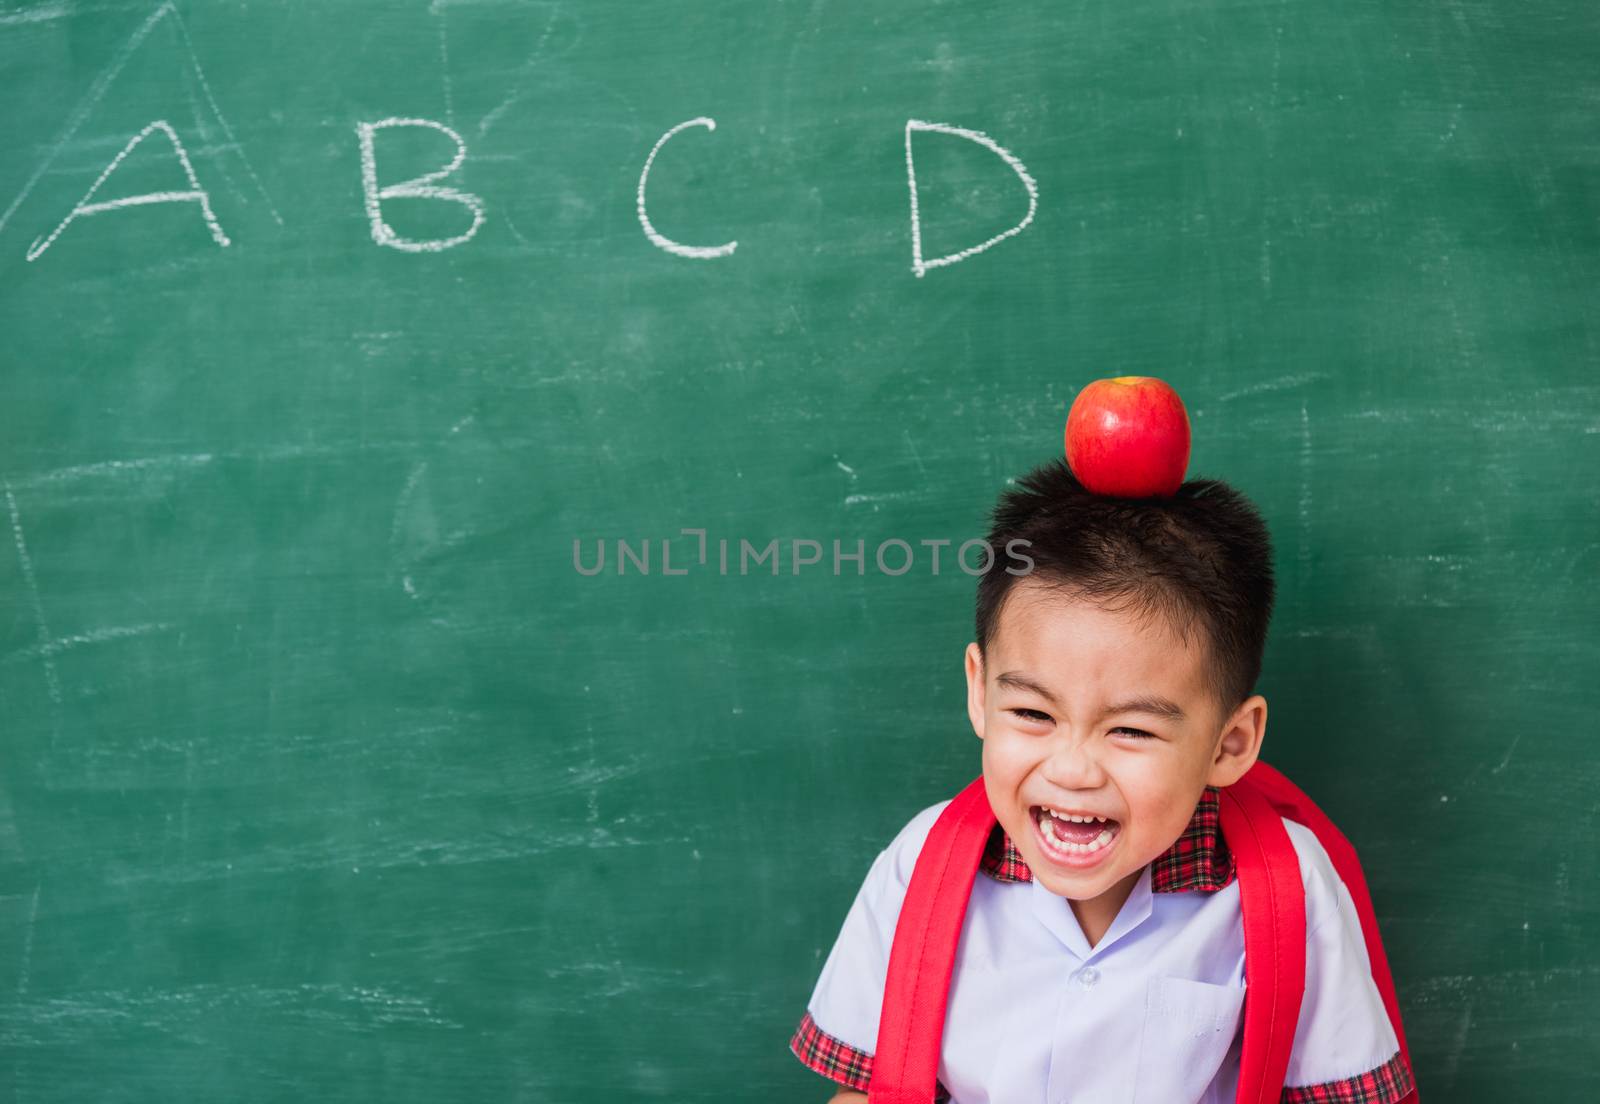 Back to School. Happy Asian funny cute little child boy from kindergarten in student uniform with school bag and red apple on head smiling on green school blackboard, First time to school education